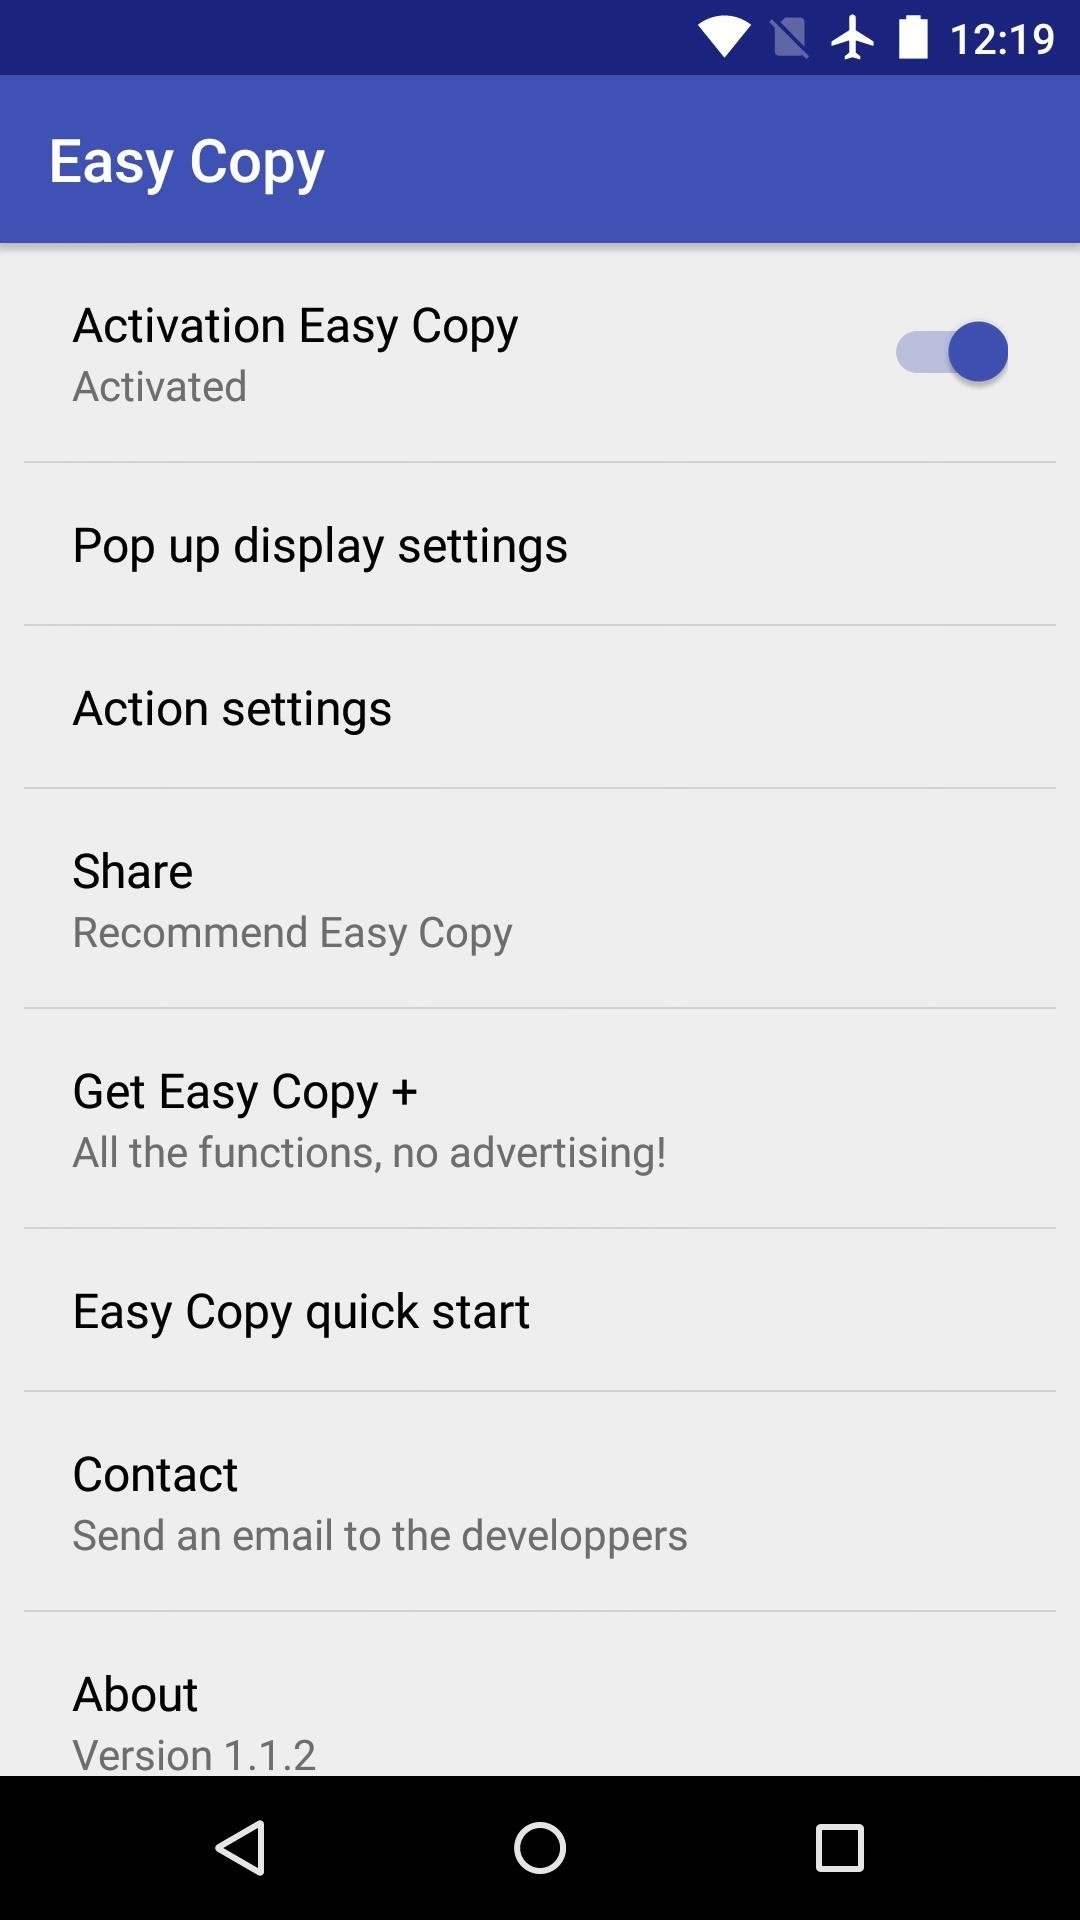 Get Enhanced Copy & Paste Functions on Android for Easier Multitasking